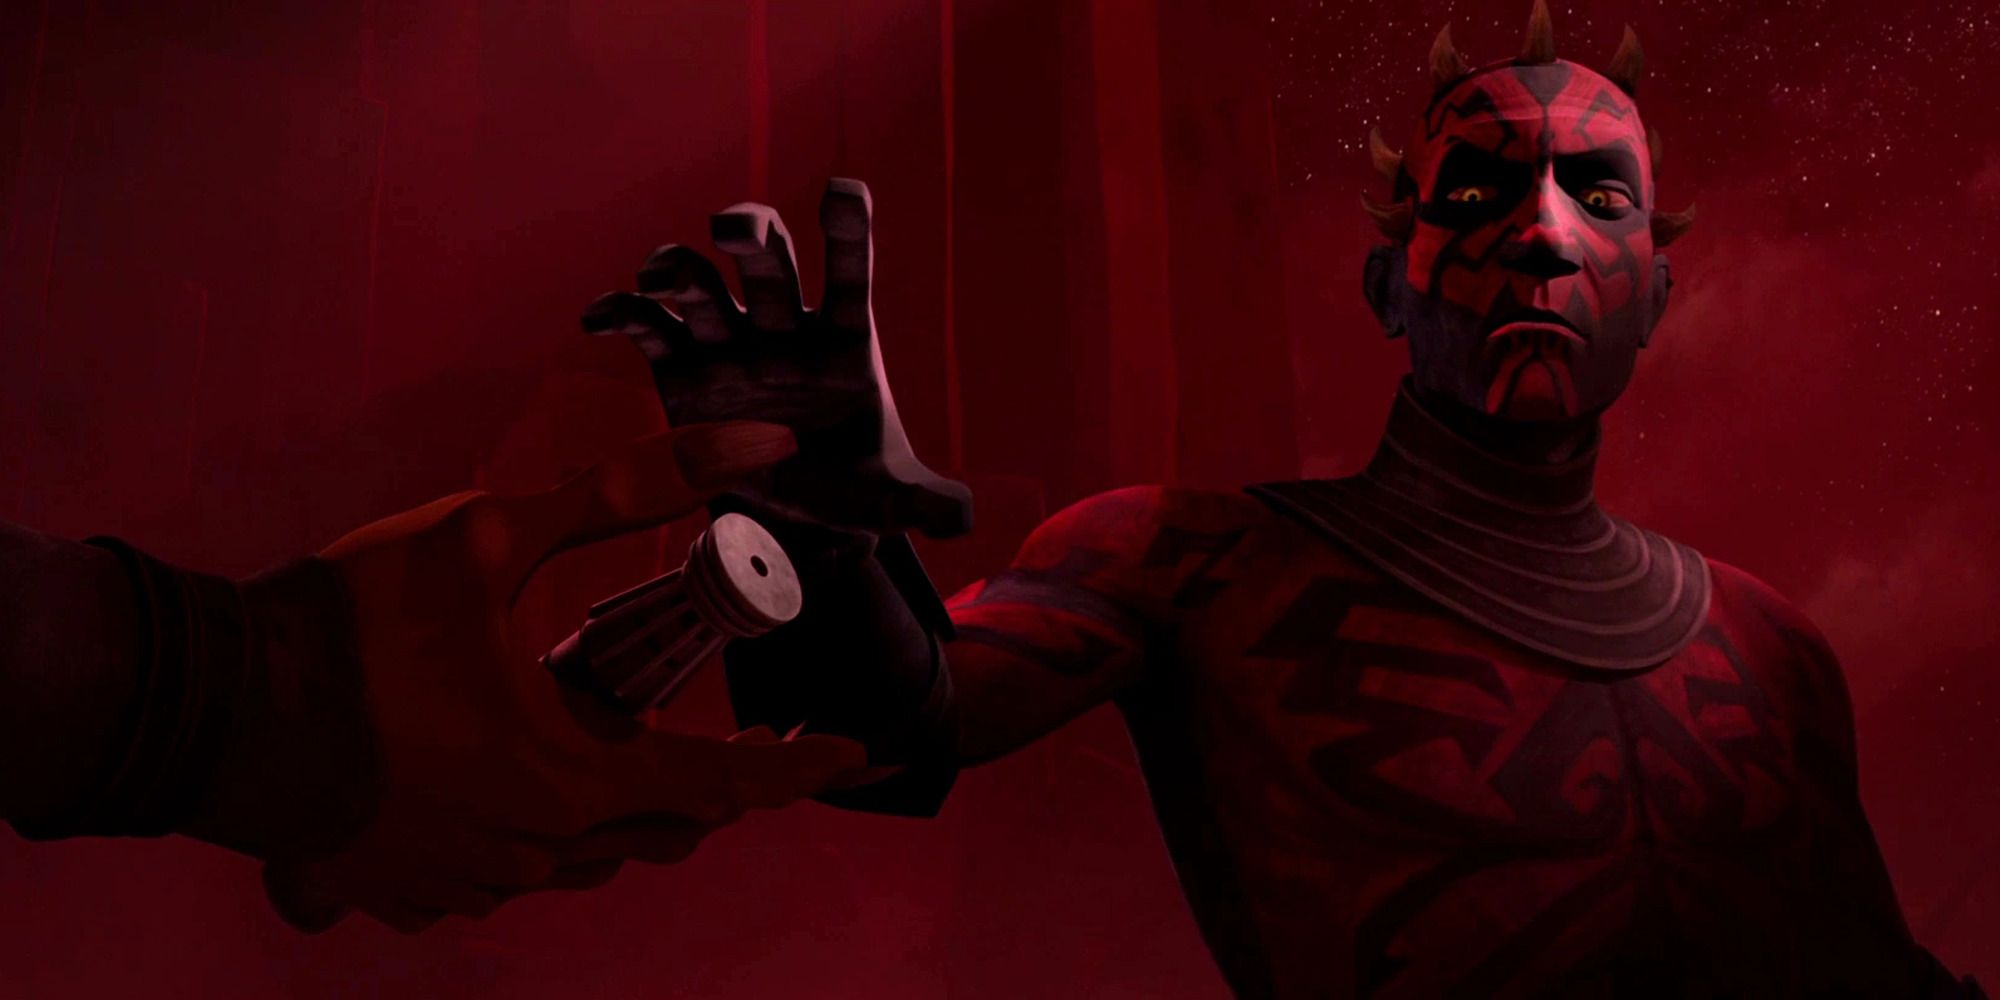 Darth Maul being offered a lightsaber in 'The Clone Wars' season 4